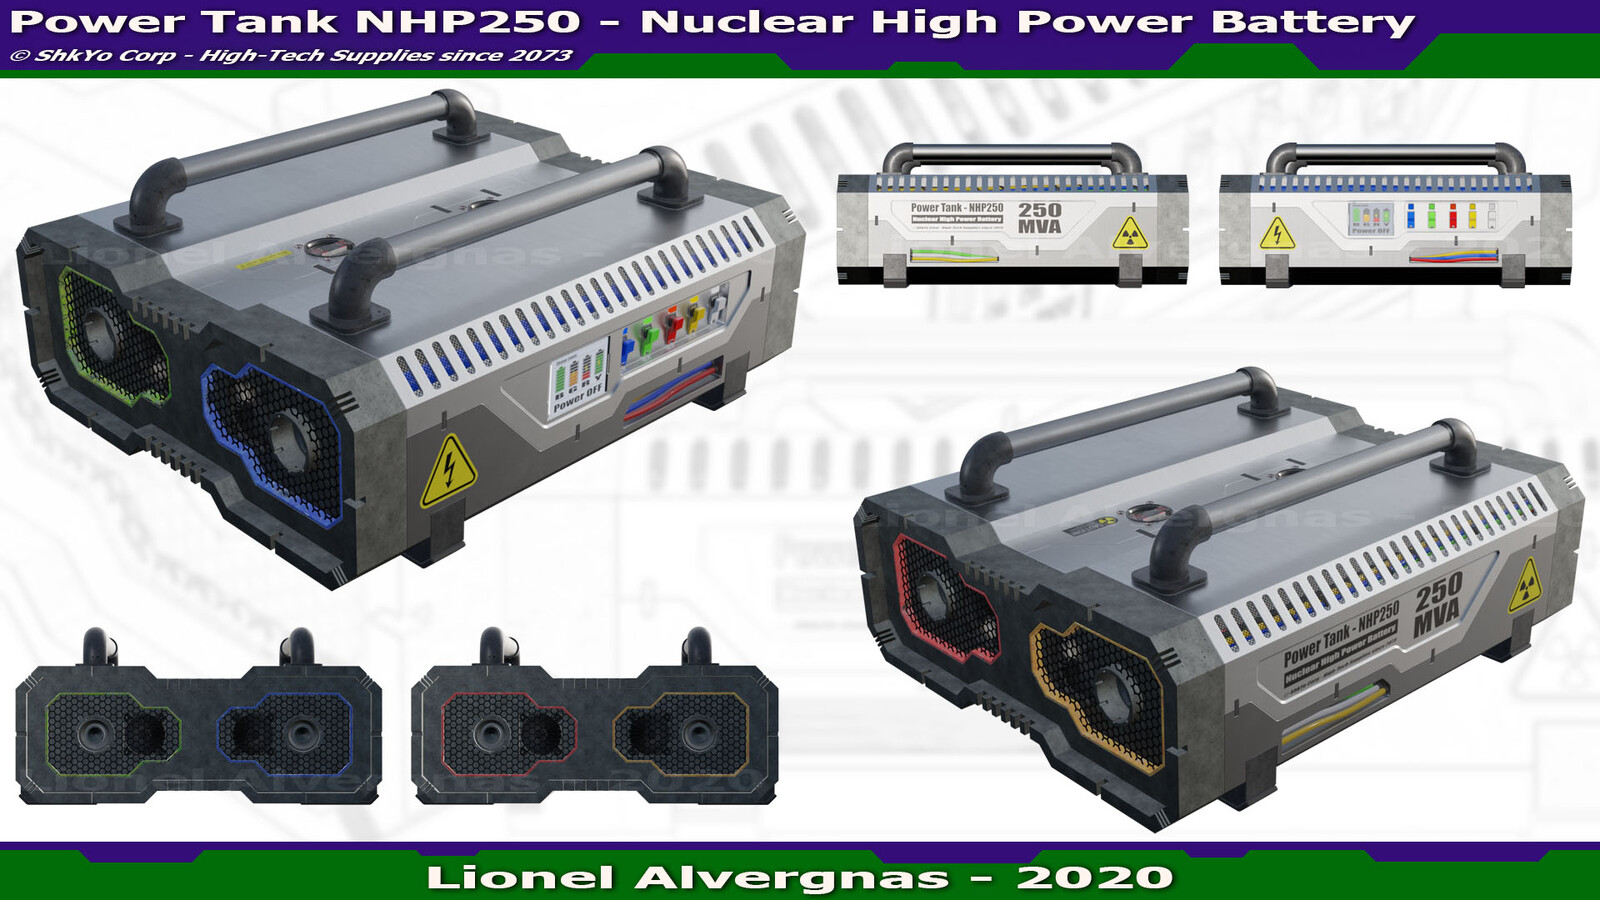 Hard Surface Sci-Fi movable Power Unit NHP250